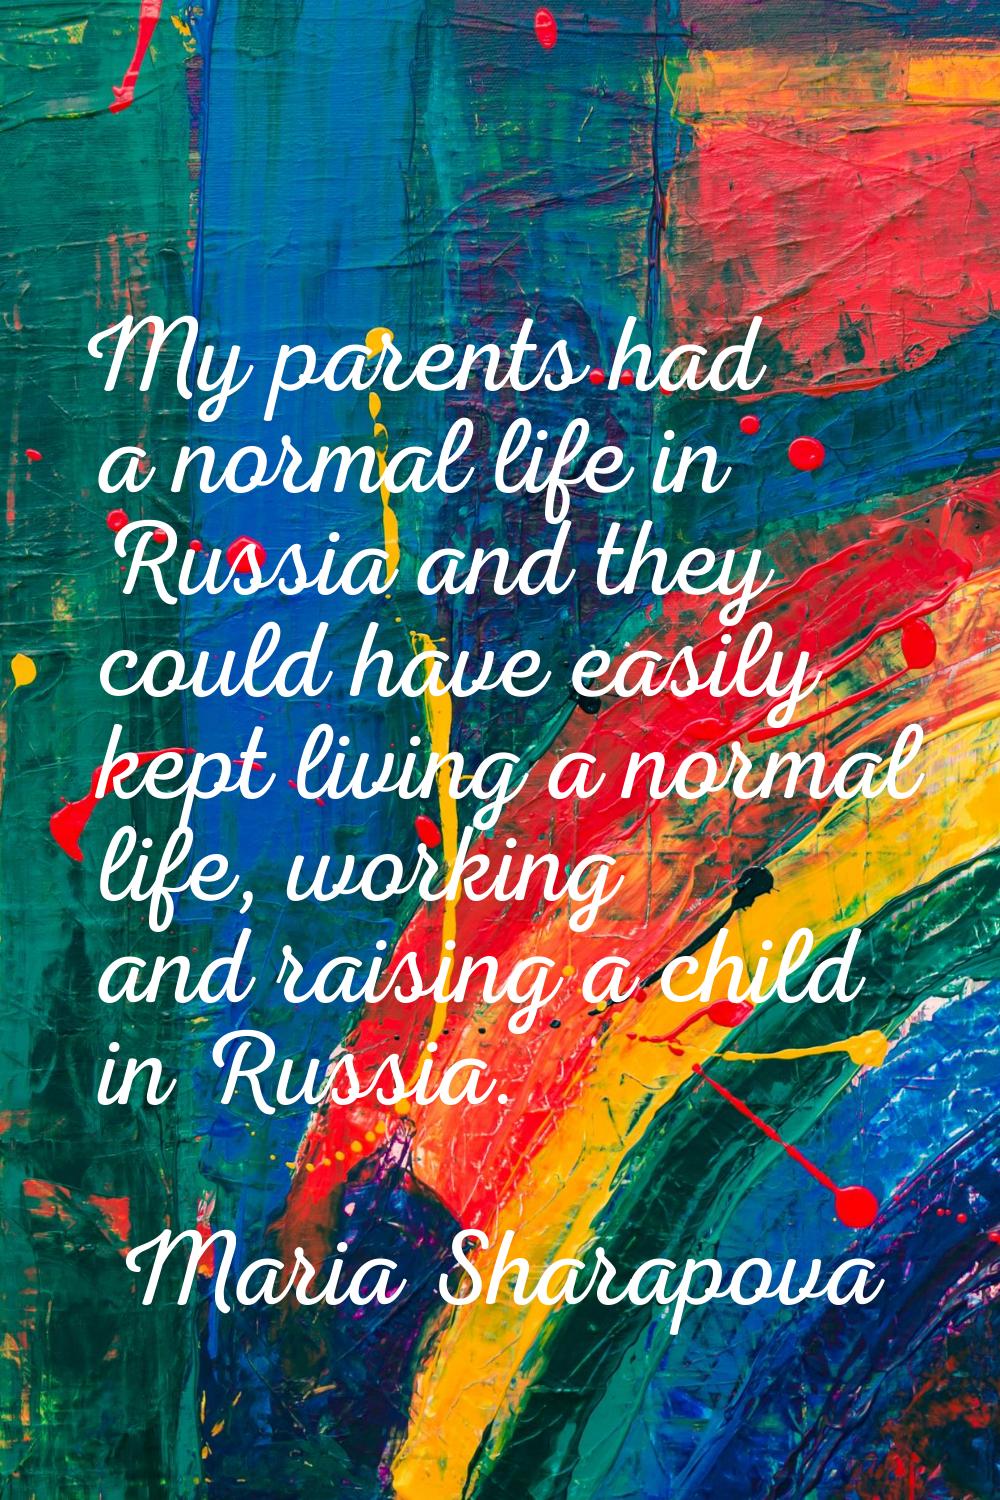 My parents had a normal life in Russia and they could have easily kept living a normal life, workin